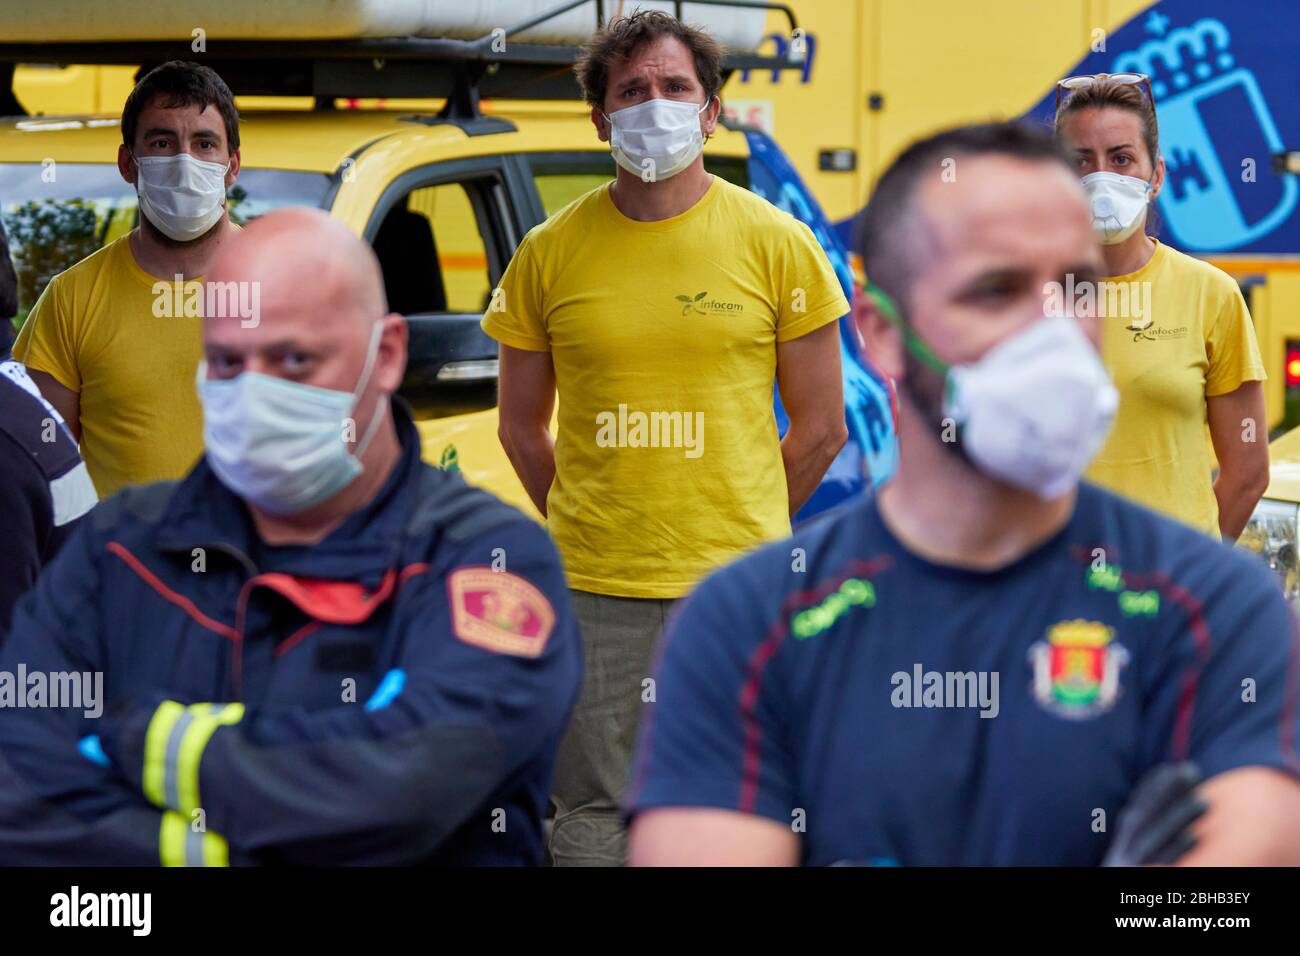 Firefighters wearing face masks in a moment of silence for the victims of the pandemic COVID19 during the applause.Since the start of the coronavirus outbreak and the state of alarm decreed by the Spanish government, people at 8pm as a tribute applaud the health personnel who return the applause from the different hospitals together with the police and members of civil protection. Stock Photo